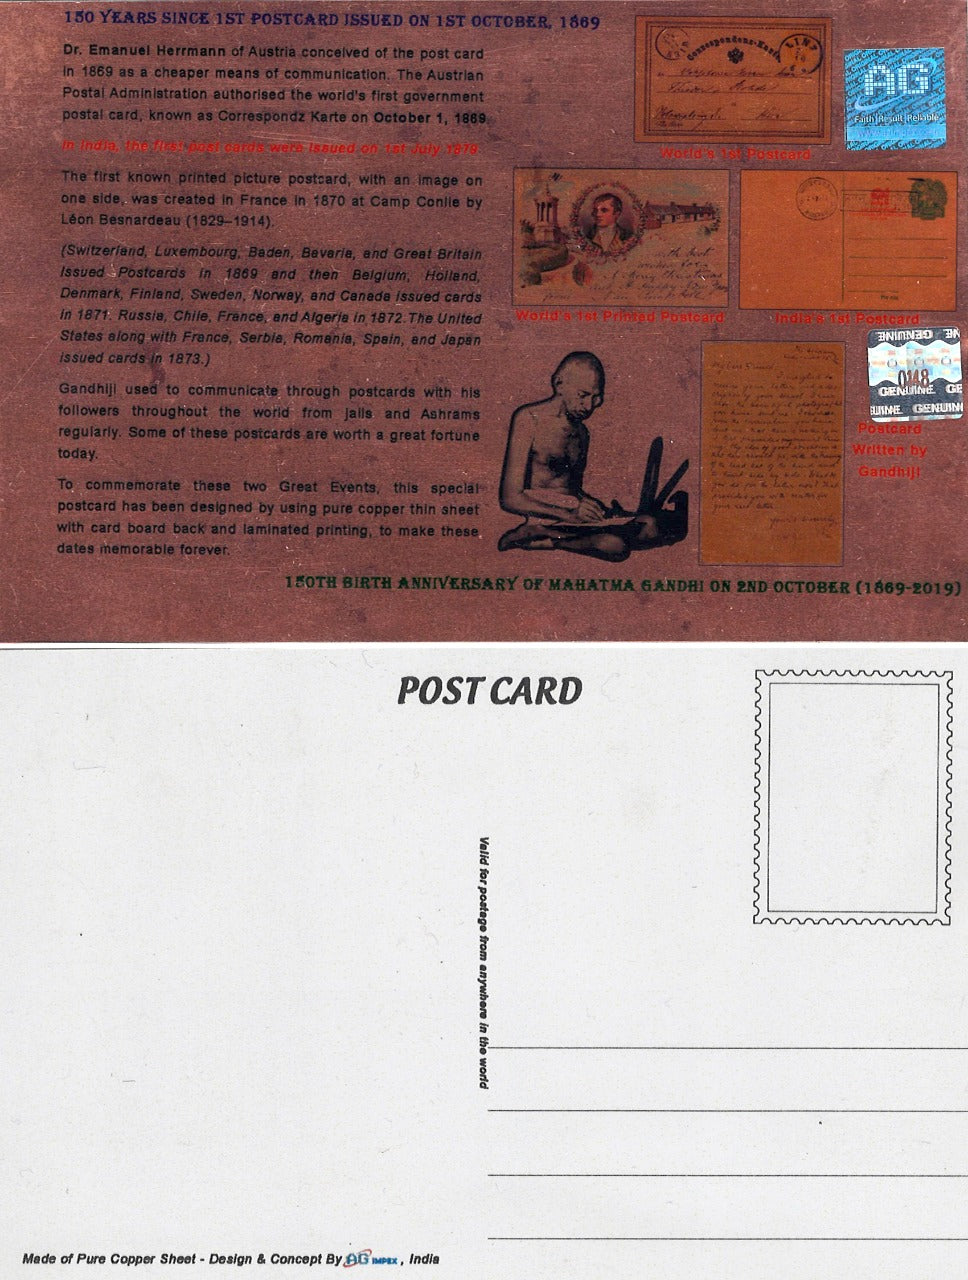 India 2019 Private - Pure Copper Postcard to Commemorate 150 Years of Post cards and 150th Birth Anniversary of Gandhiji-Limited Edition of 150 Pcs.